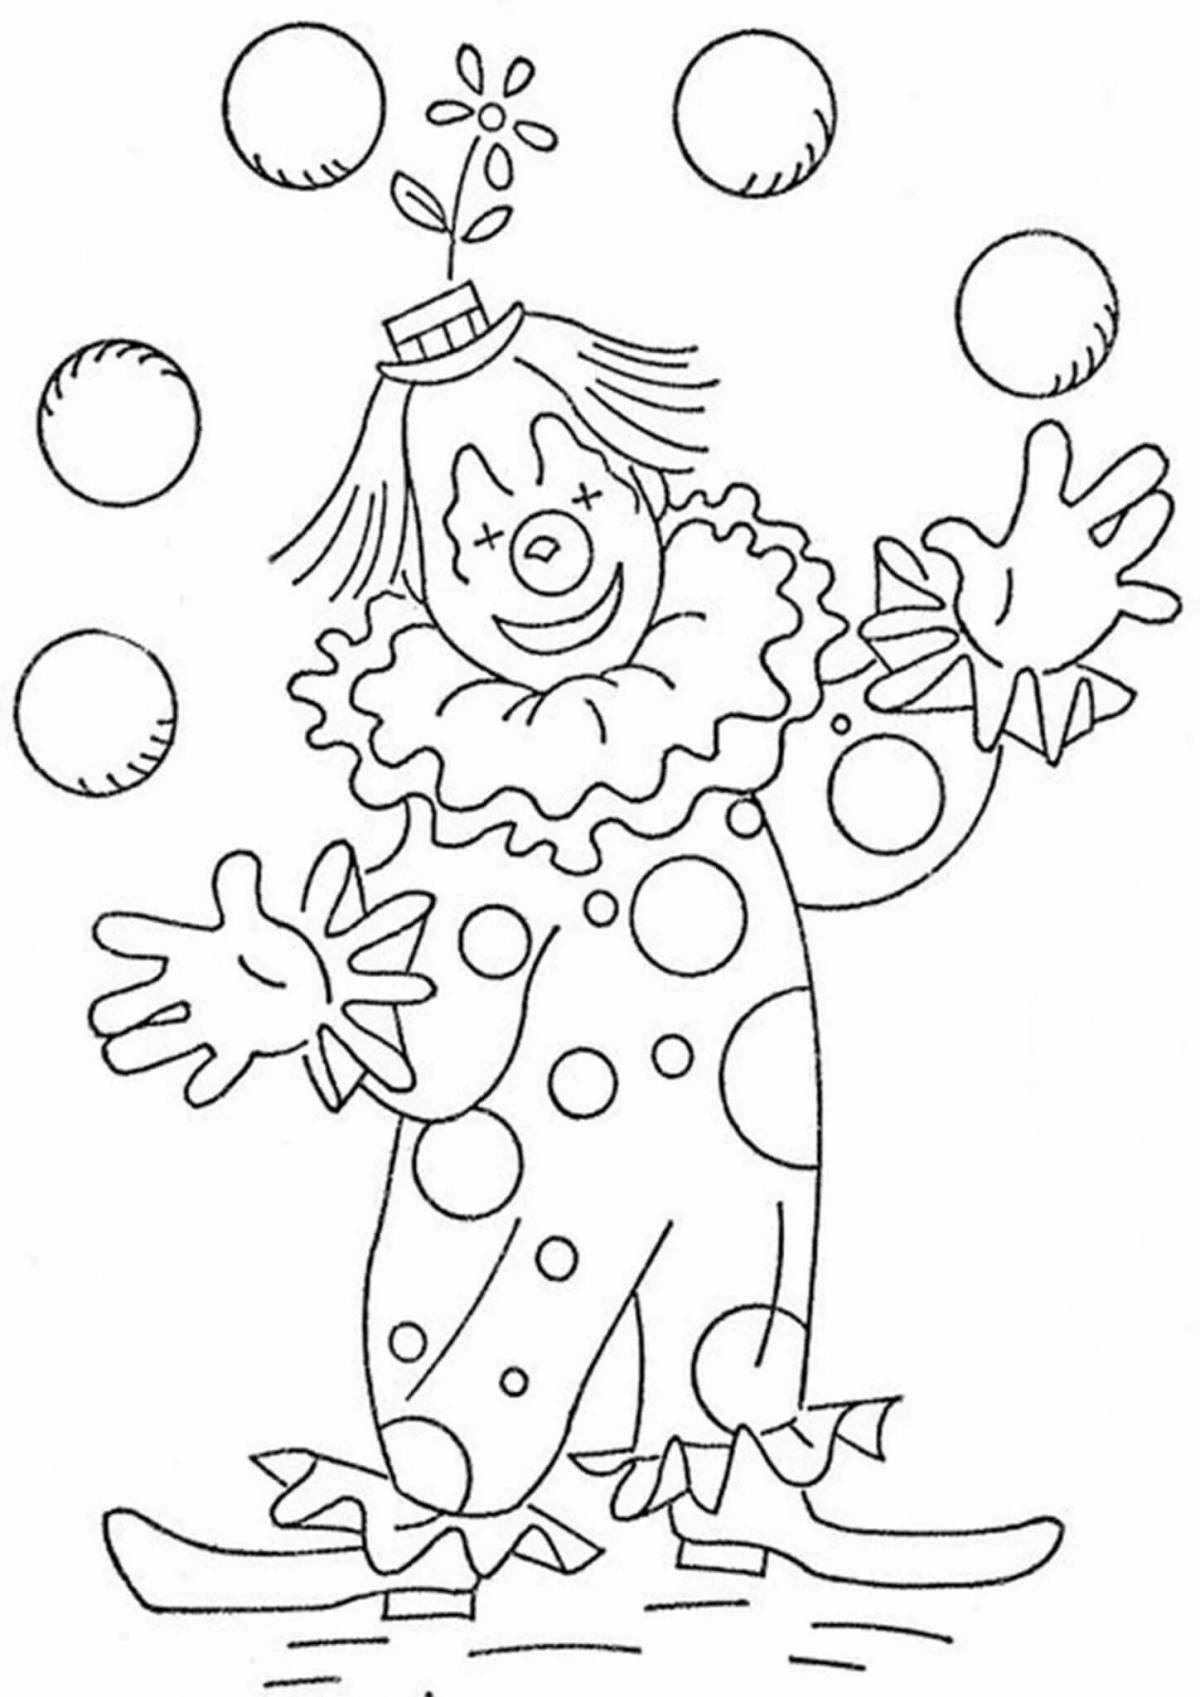 Magic clown coloring book for kids 6-7 years old